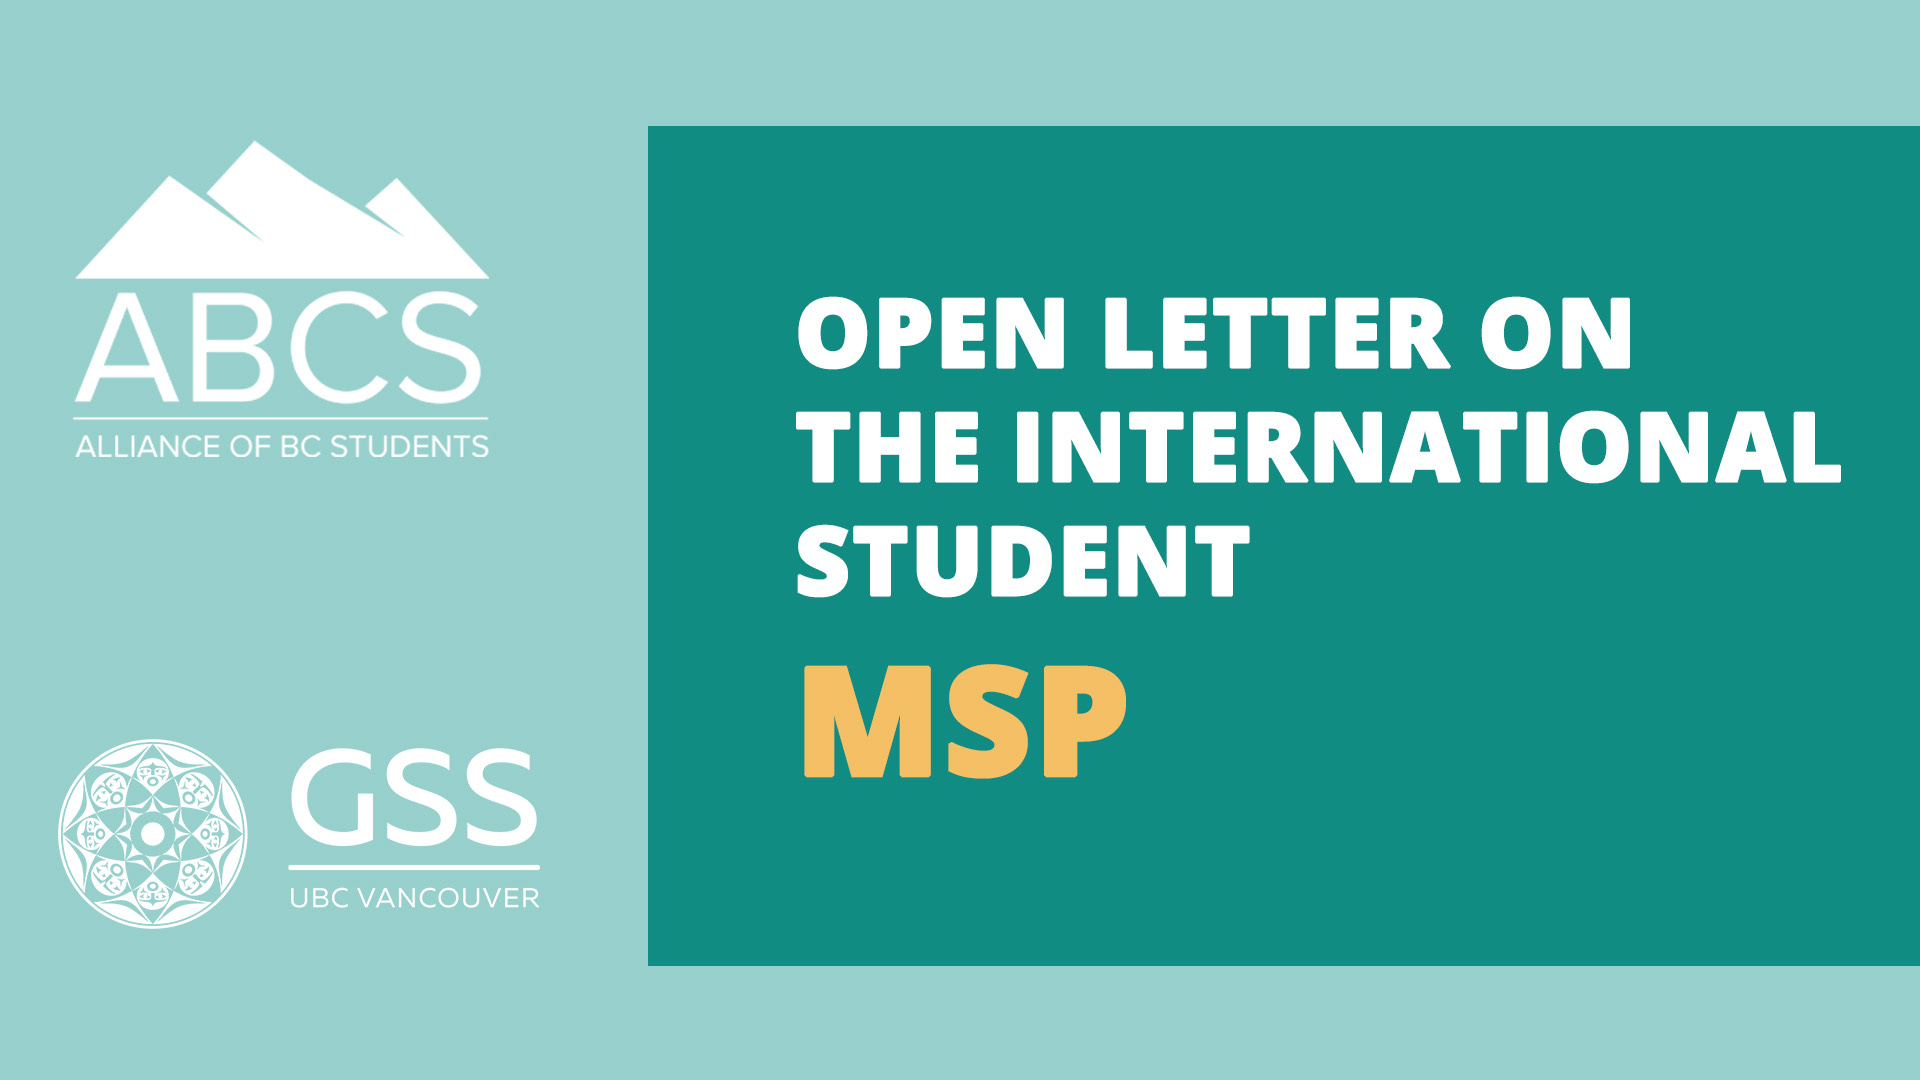 Open Letter on the Changes to the MSP for International Students